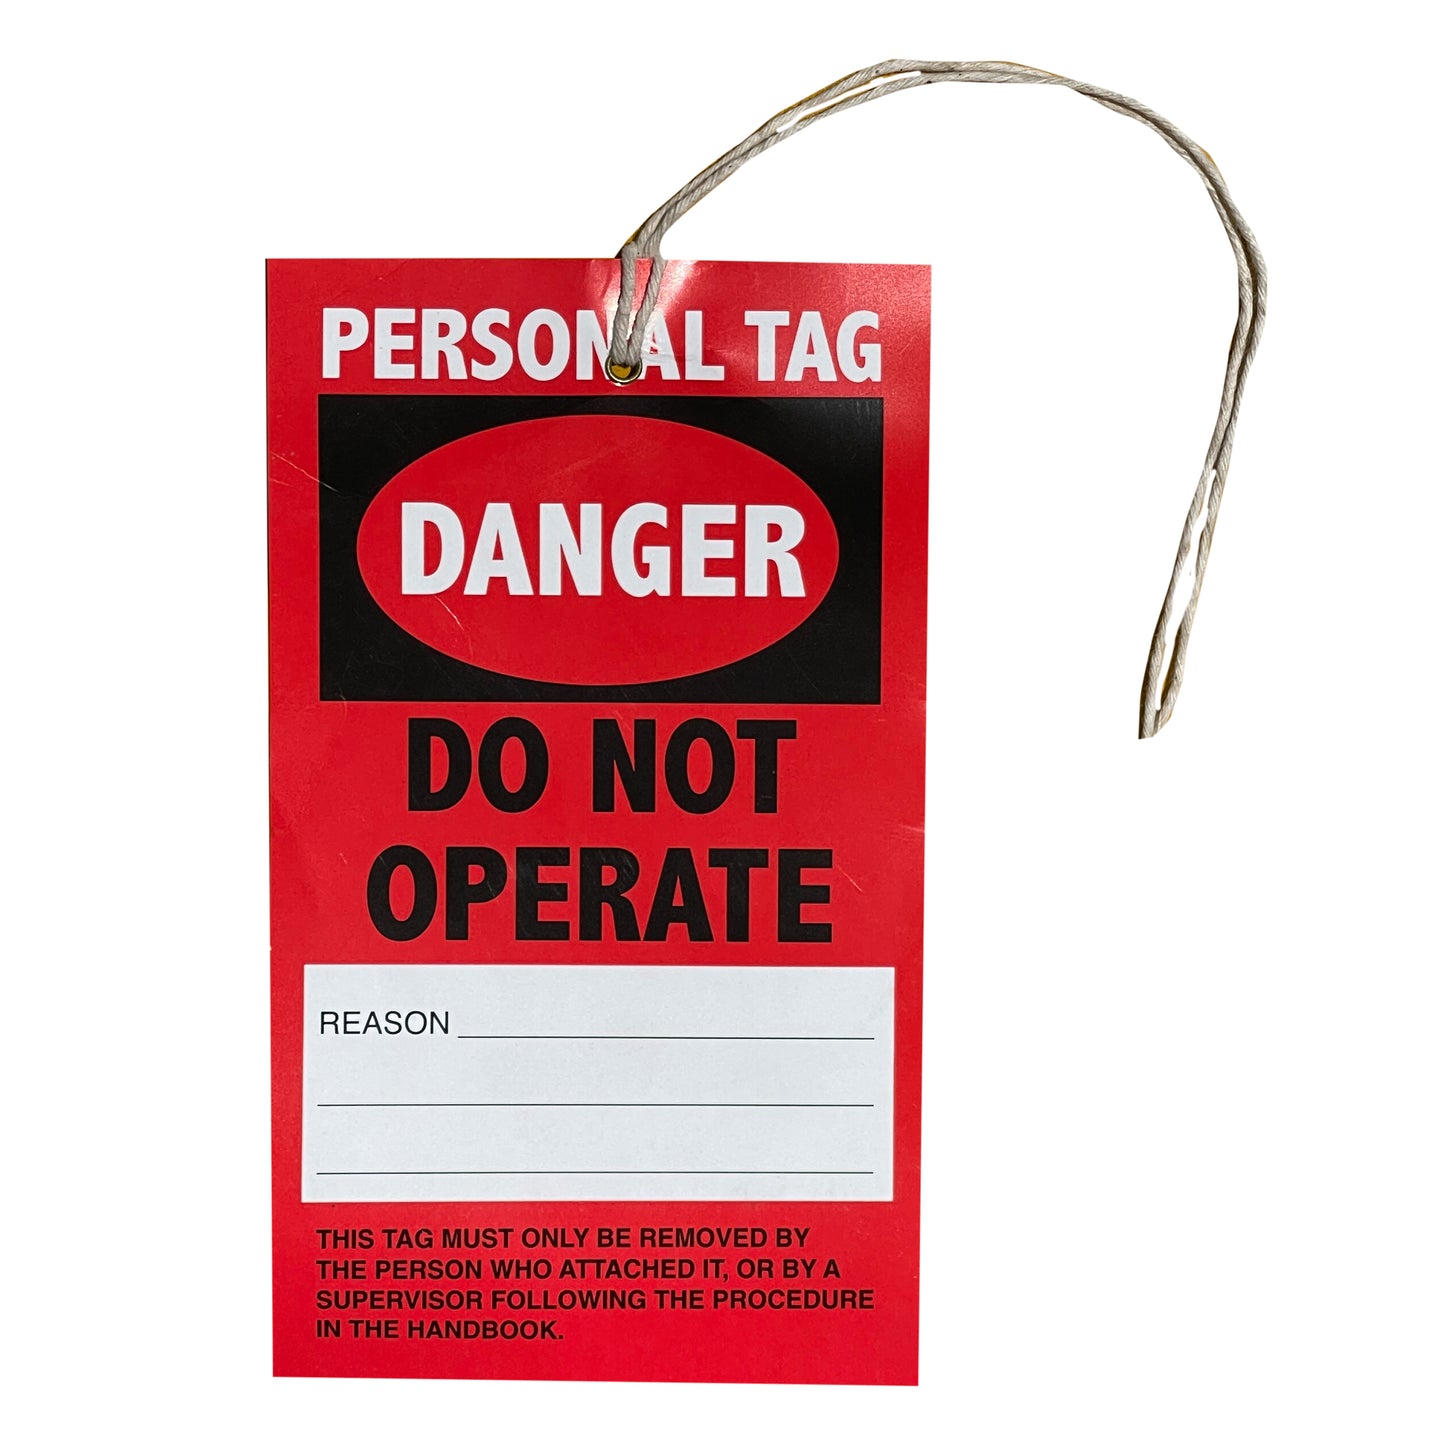 Danger: Do Not Operate Tag